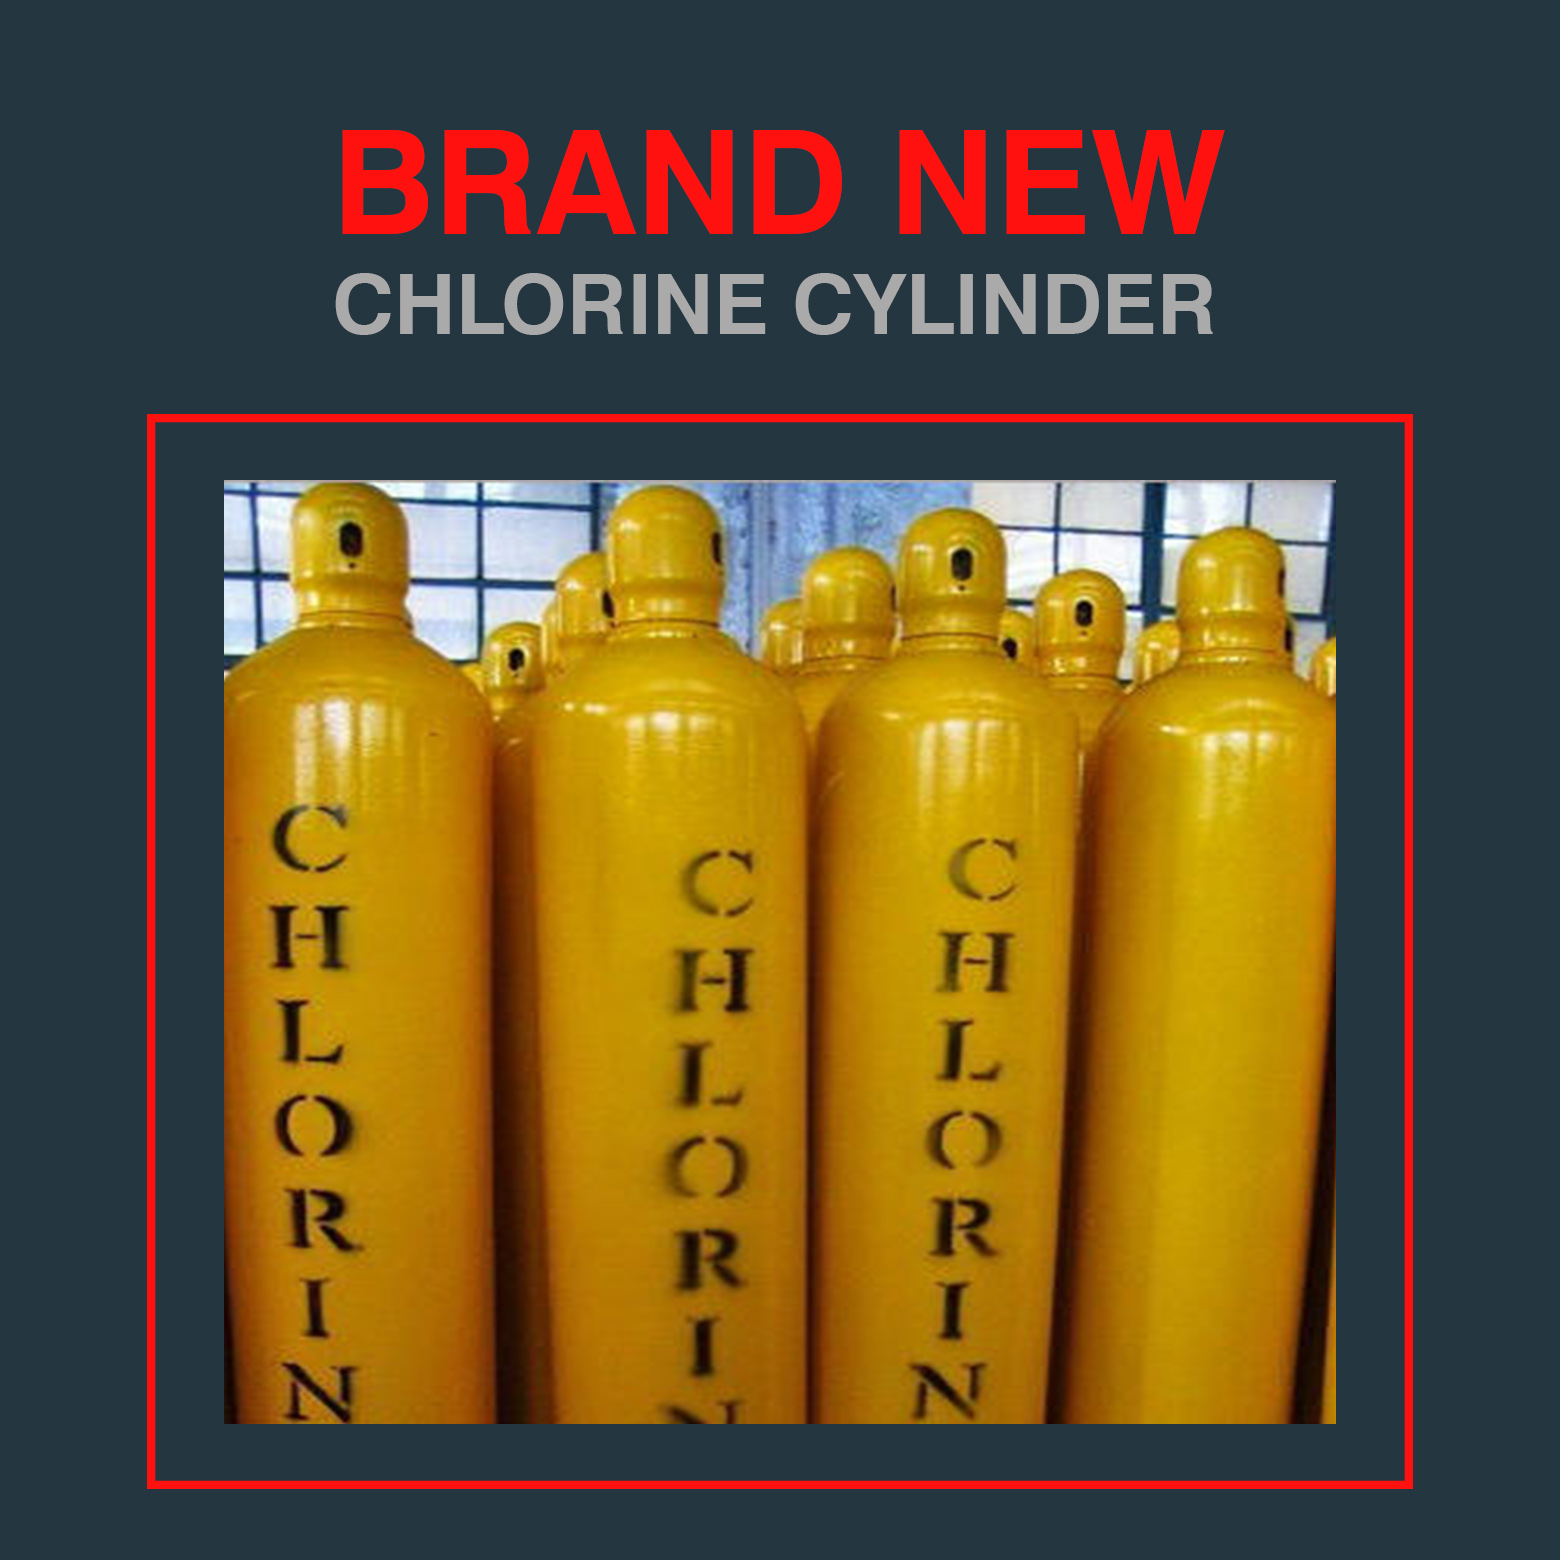 Brand New Chlorine Cylinders Manufacturers